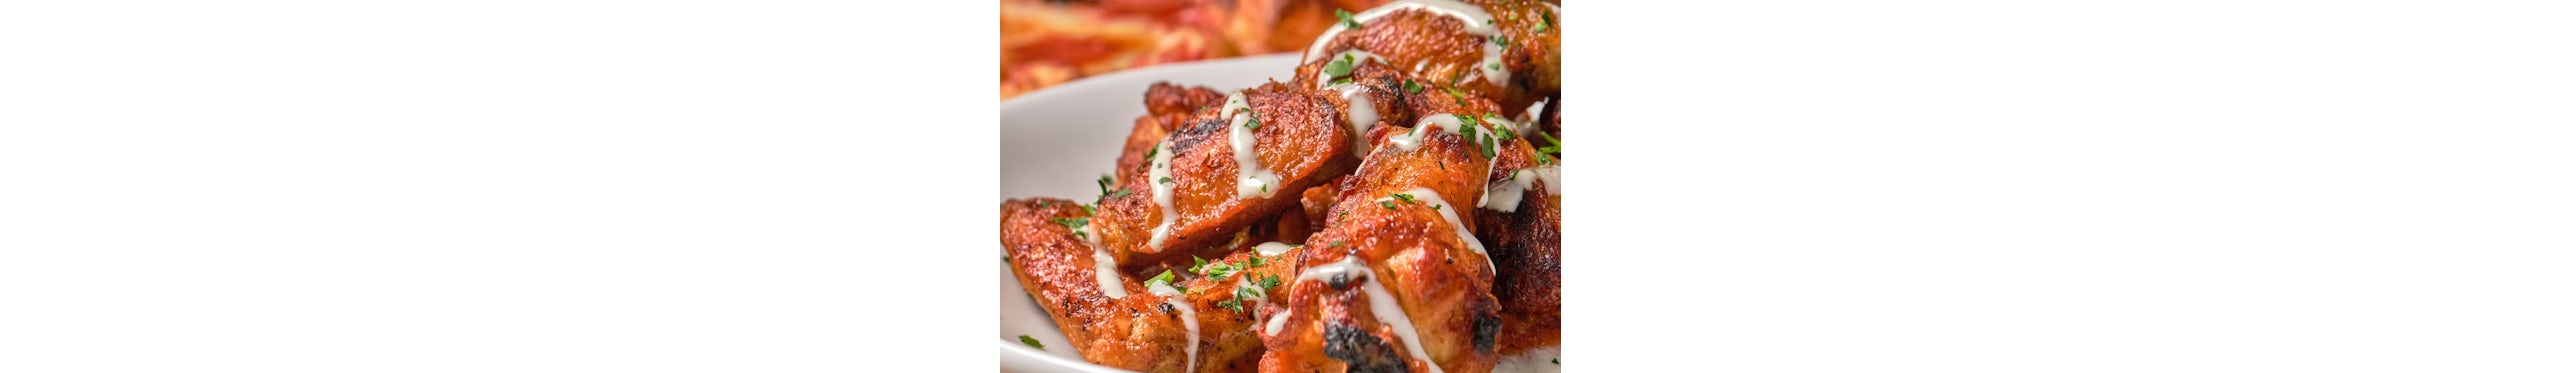 Tuscan Chicken Wings